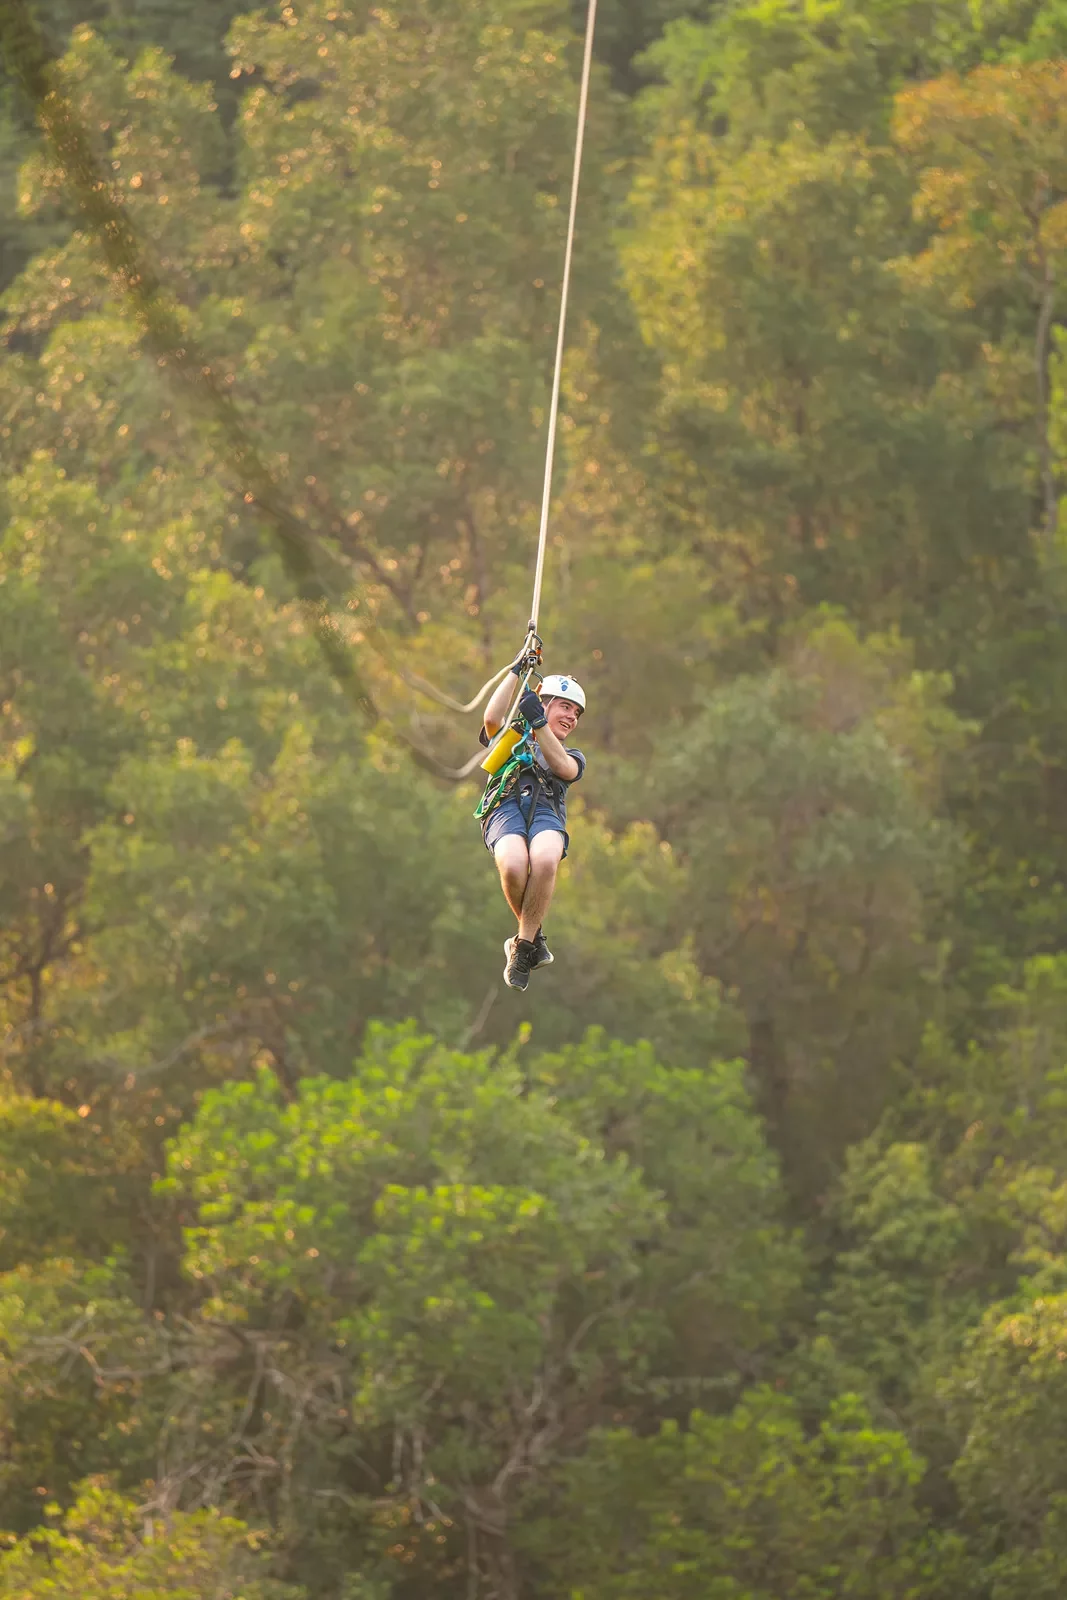 Woman ziplining in the middle of a forest